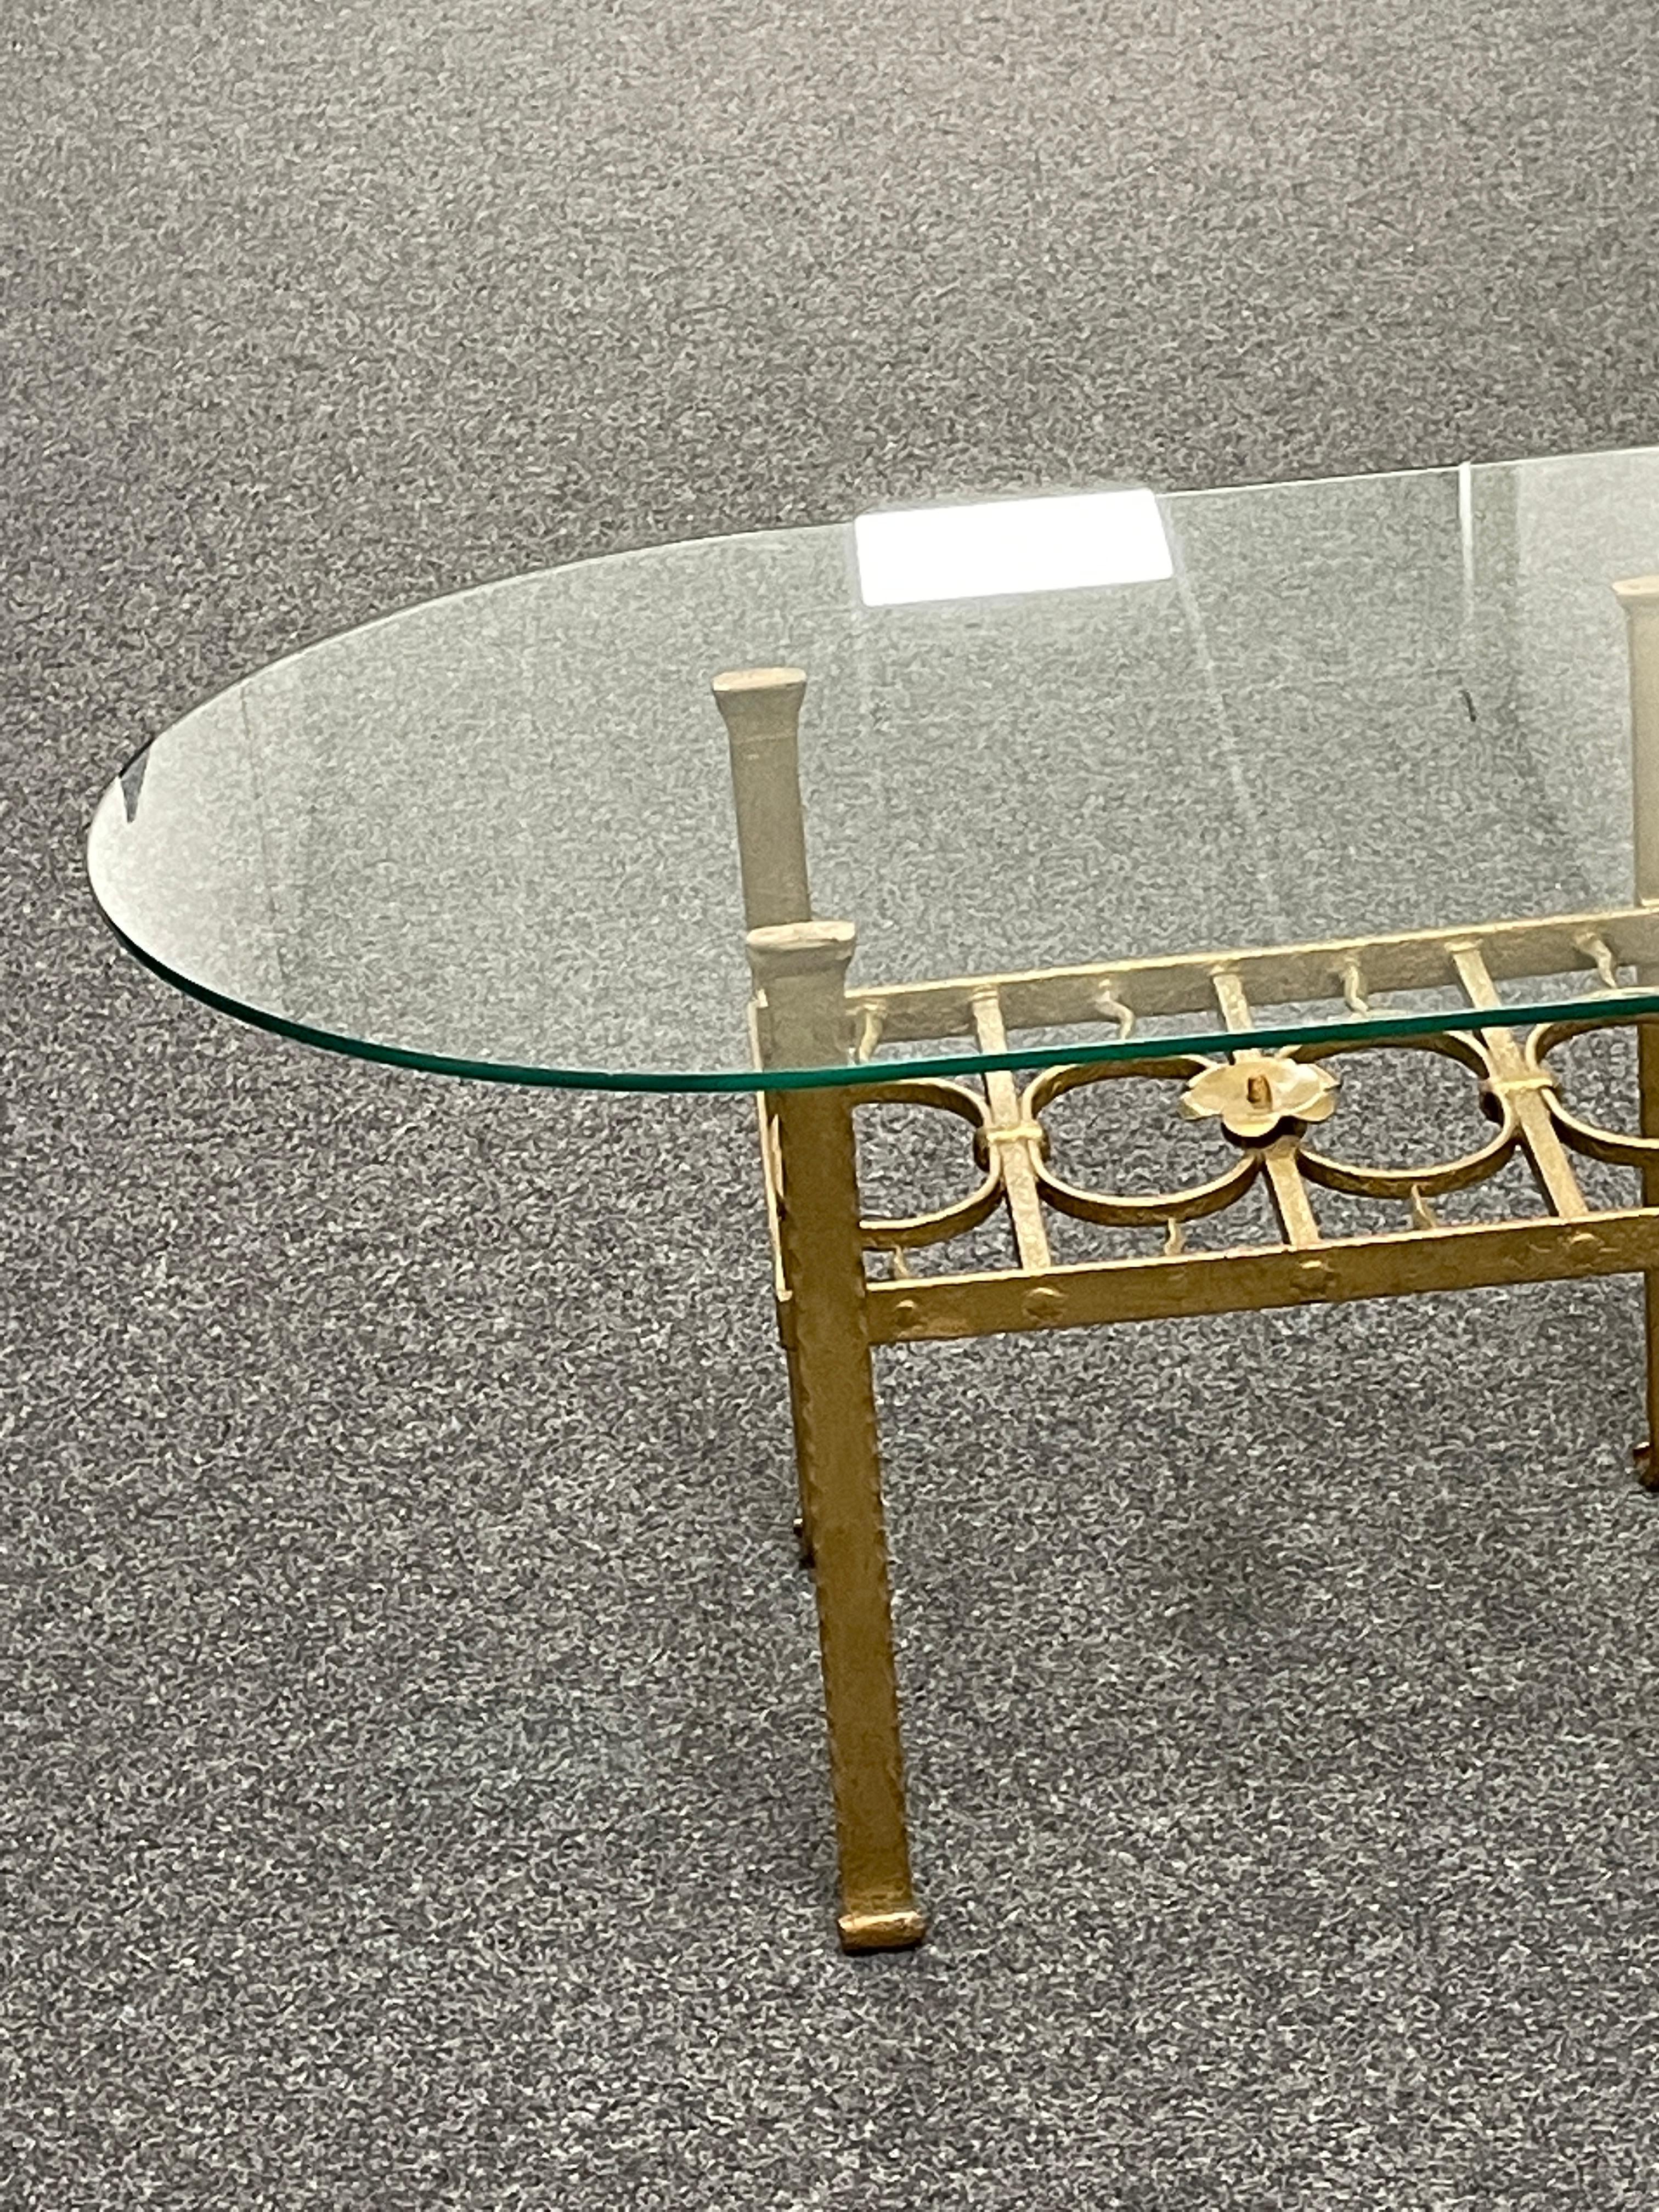 Brutalist Gilt Iron Coffee Table, Tole Toleware Style, German, 1960s For Sale 6